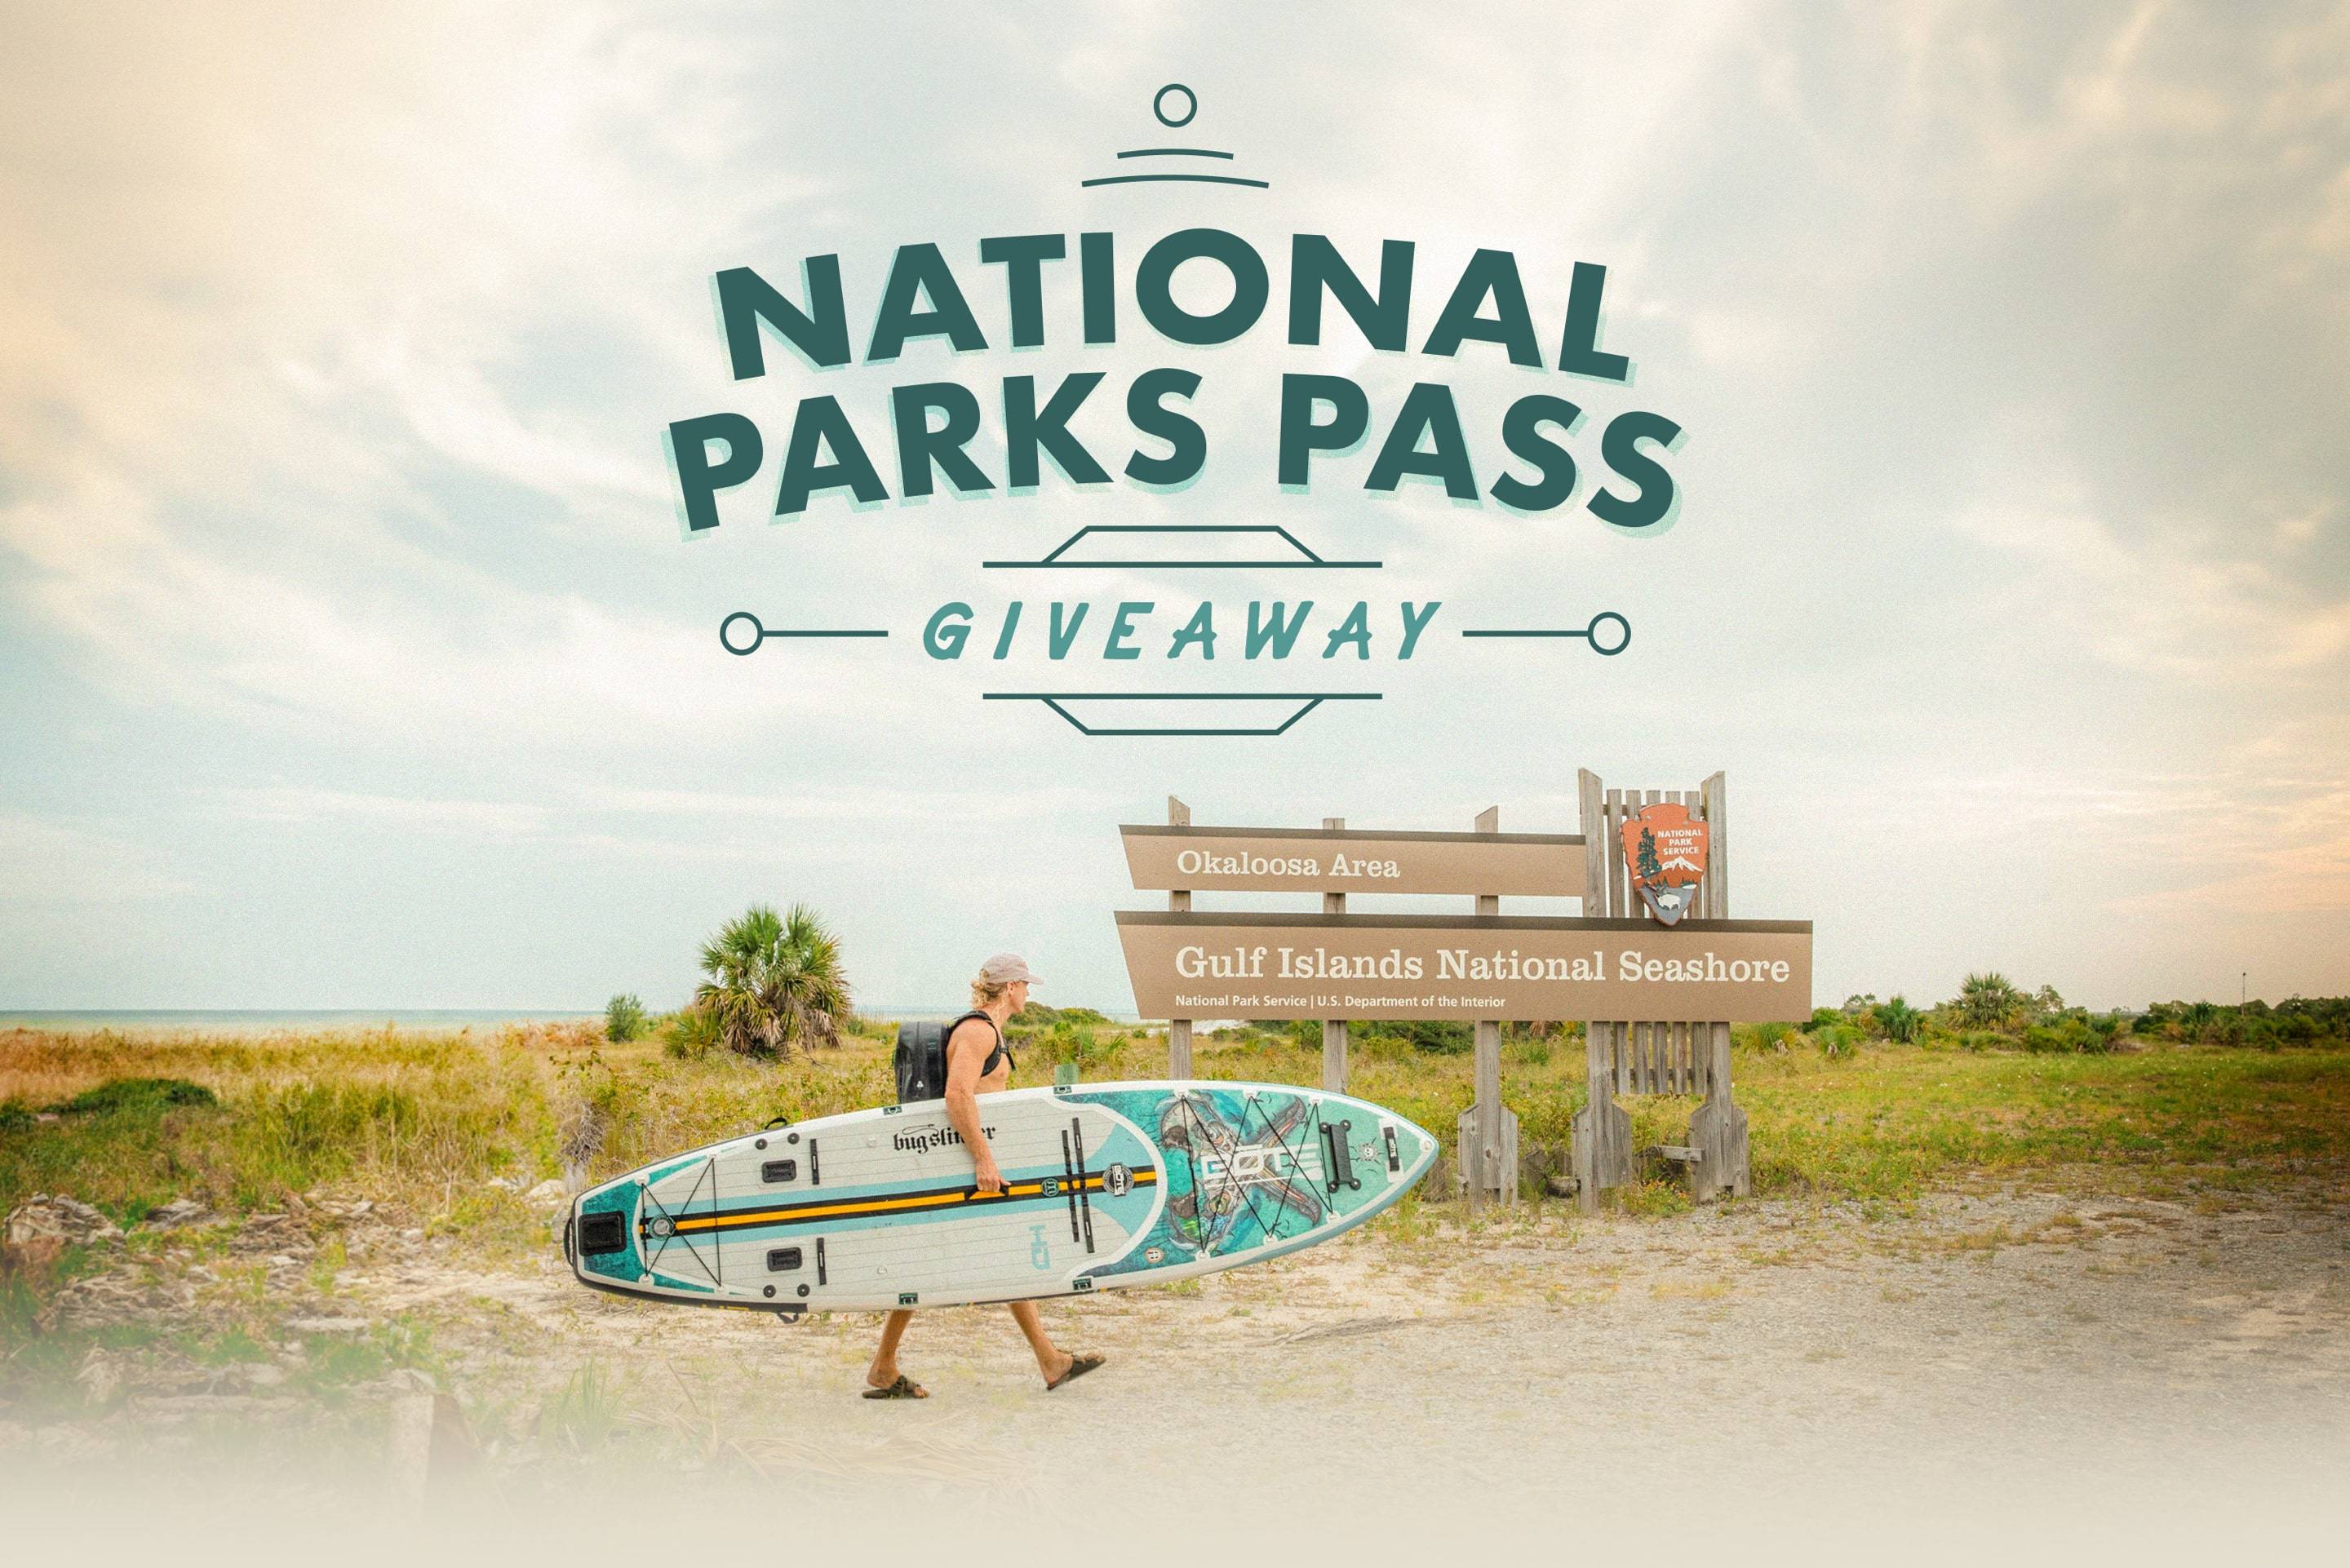 National Parks Pass Giveaway